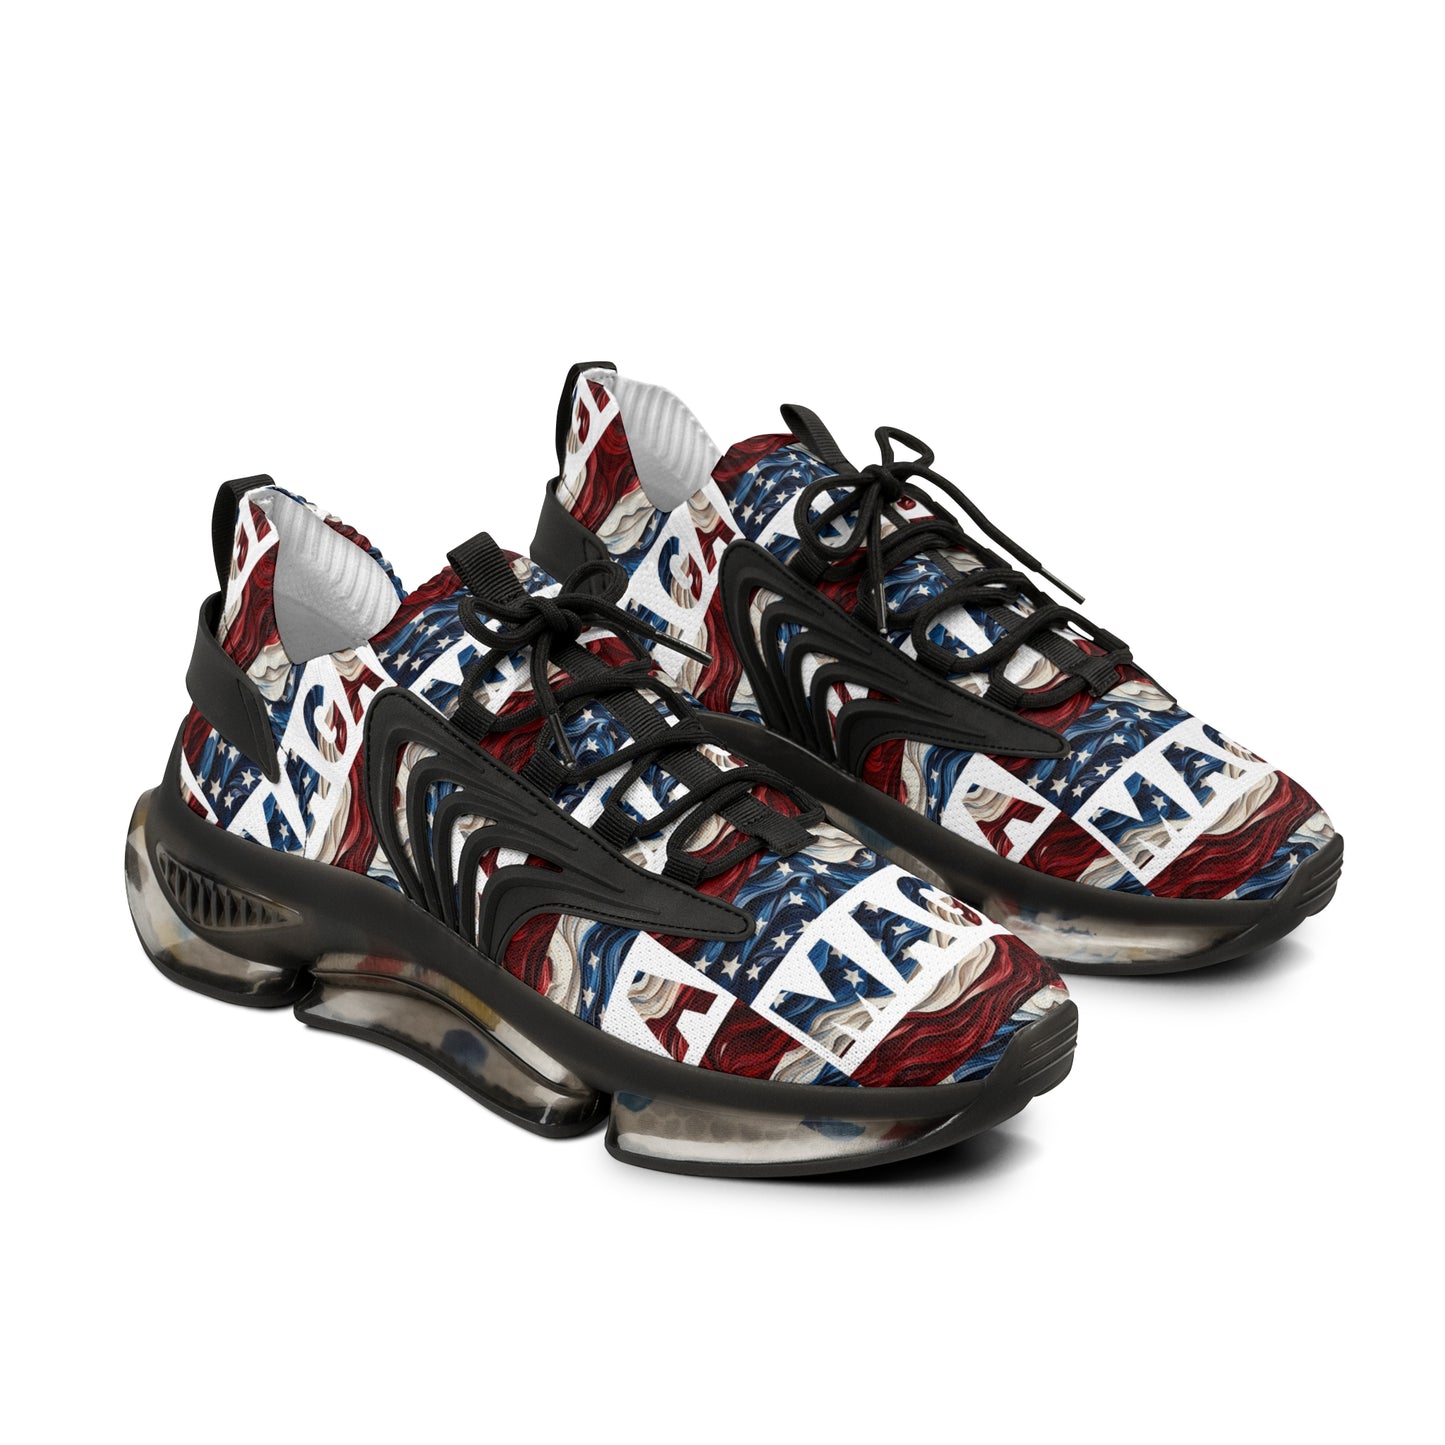 MAGA Trump 2024 Red White and Blue Men's Mesh Sneakers